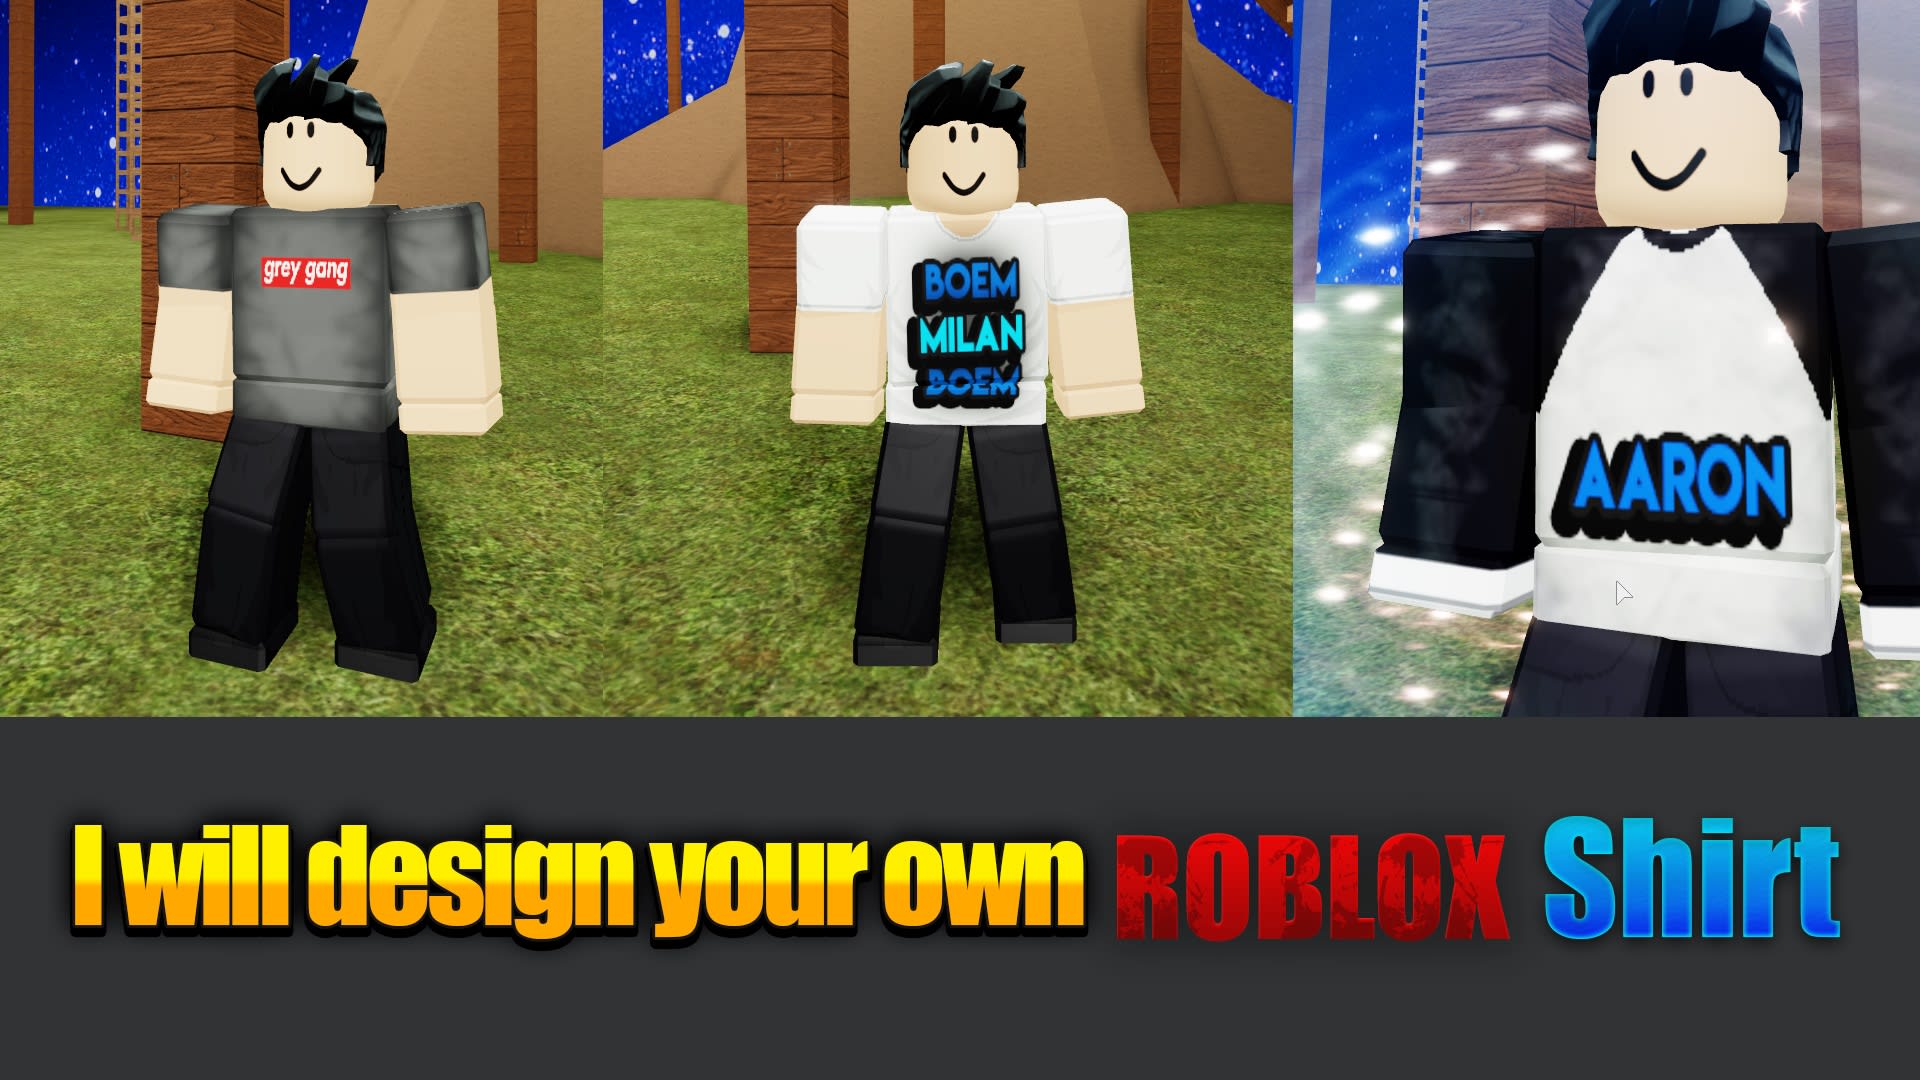 How to Make a Shirt in Roblox - Make Your Own Roblox Shirt 